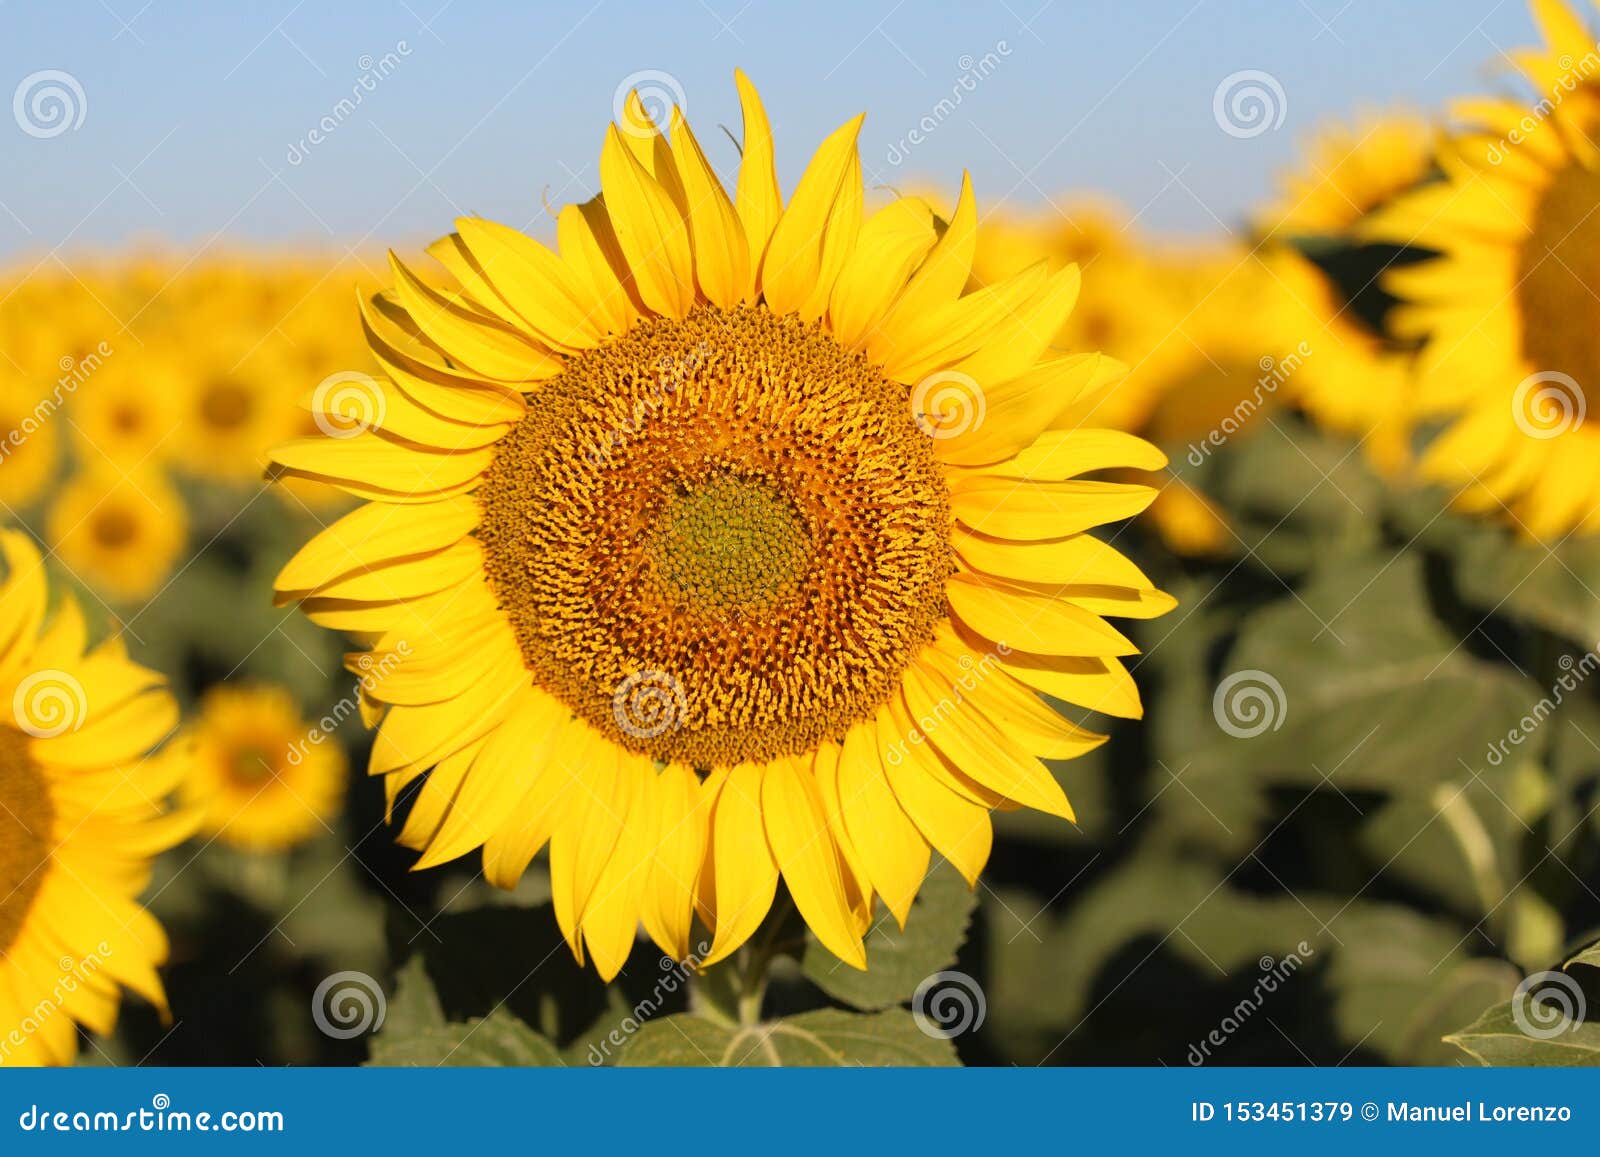 beautiful picture of sunflowers and soaking up the sun in the field